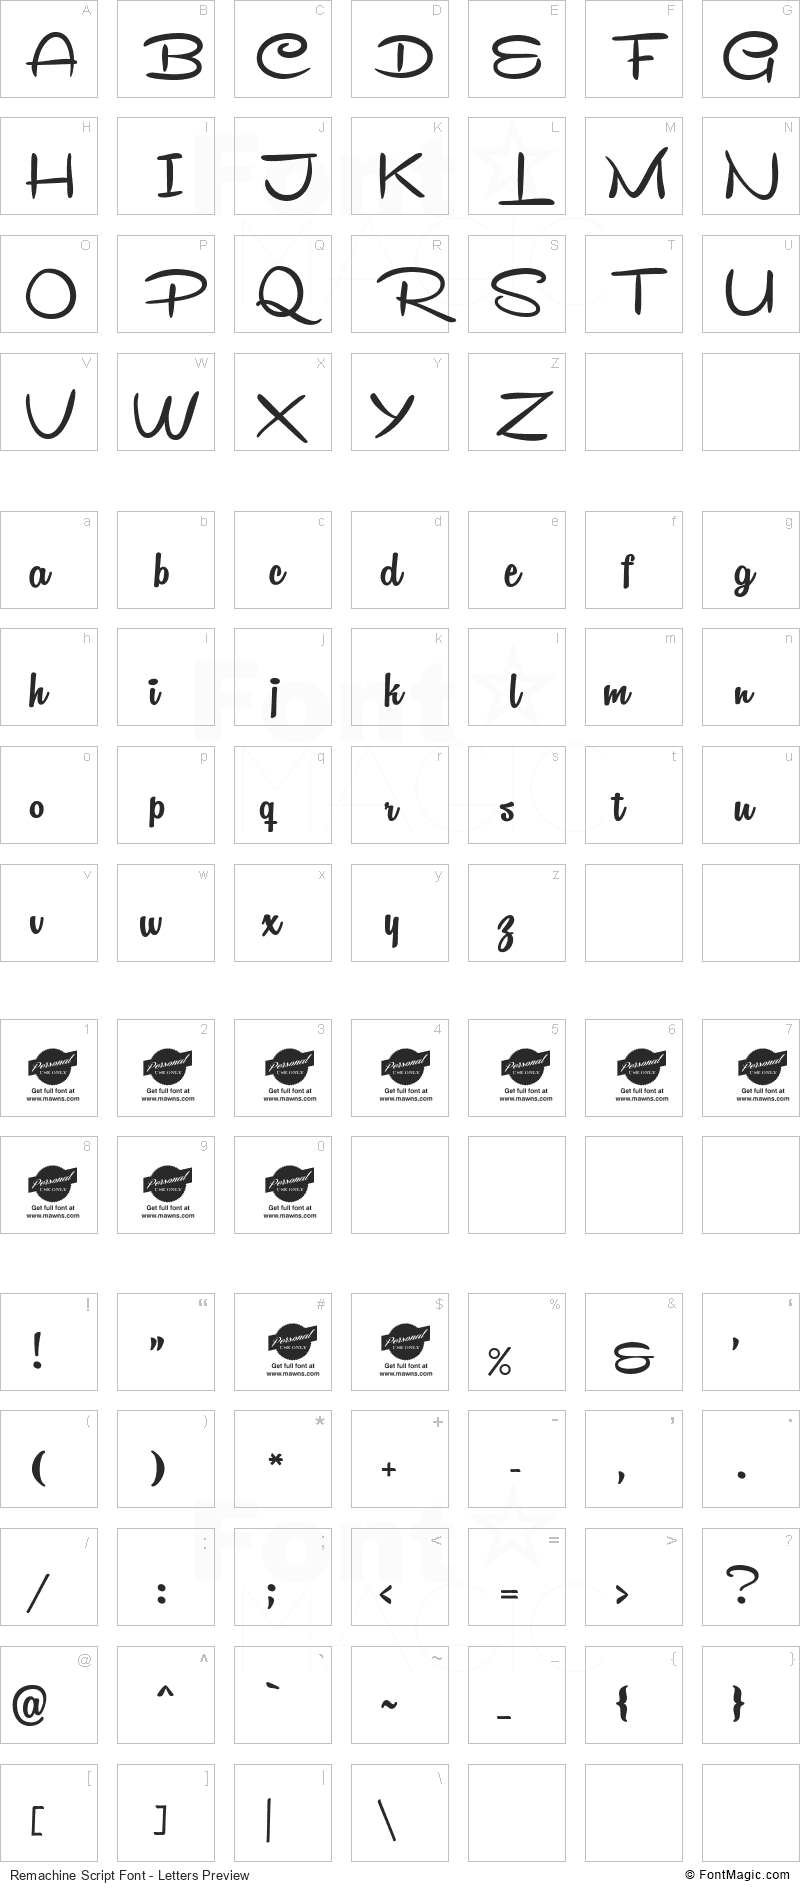 Remachine Script Font - All Latters Preview Chart